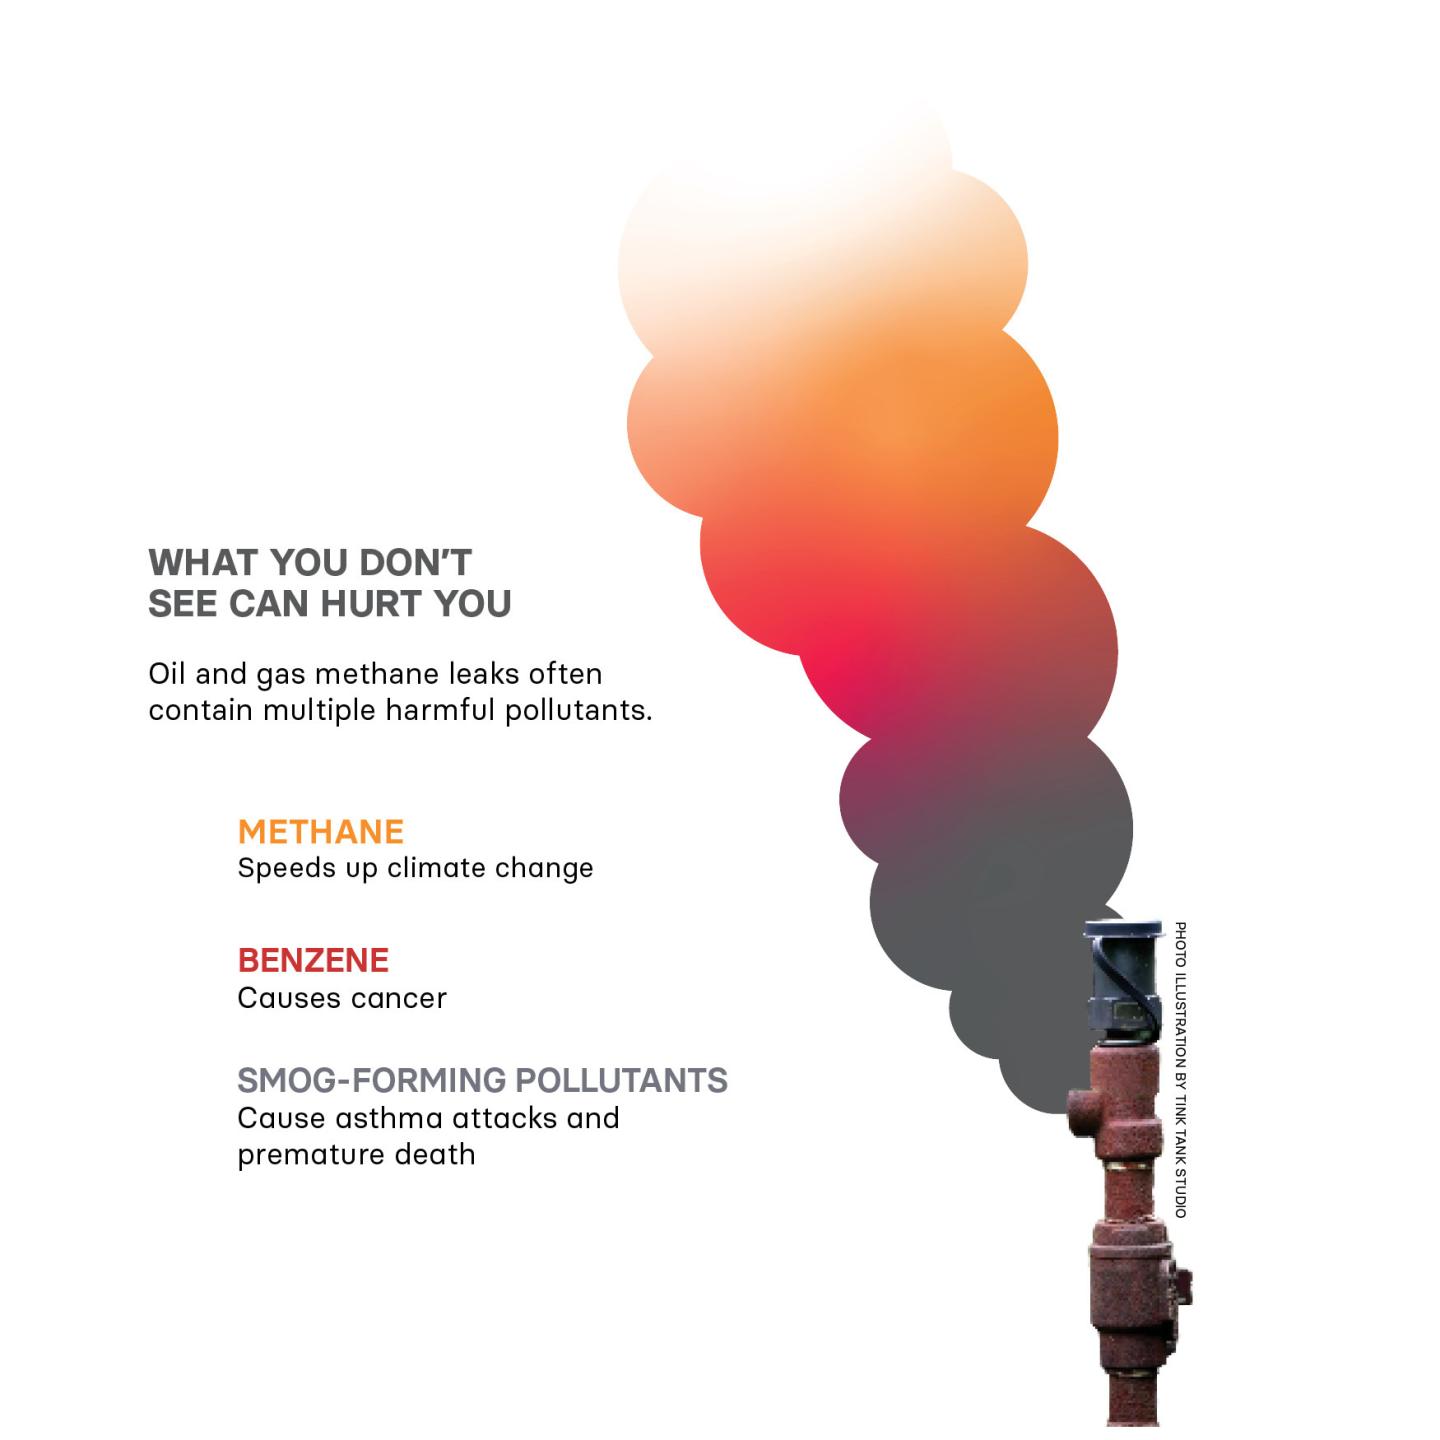 An infographic with a plume of smoke coming from a pipe with methane, benzene and smog-forming pollutants labeled as harmful leaks